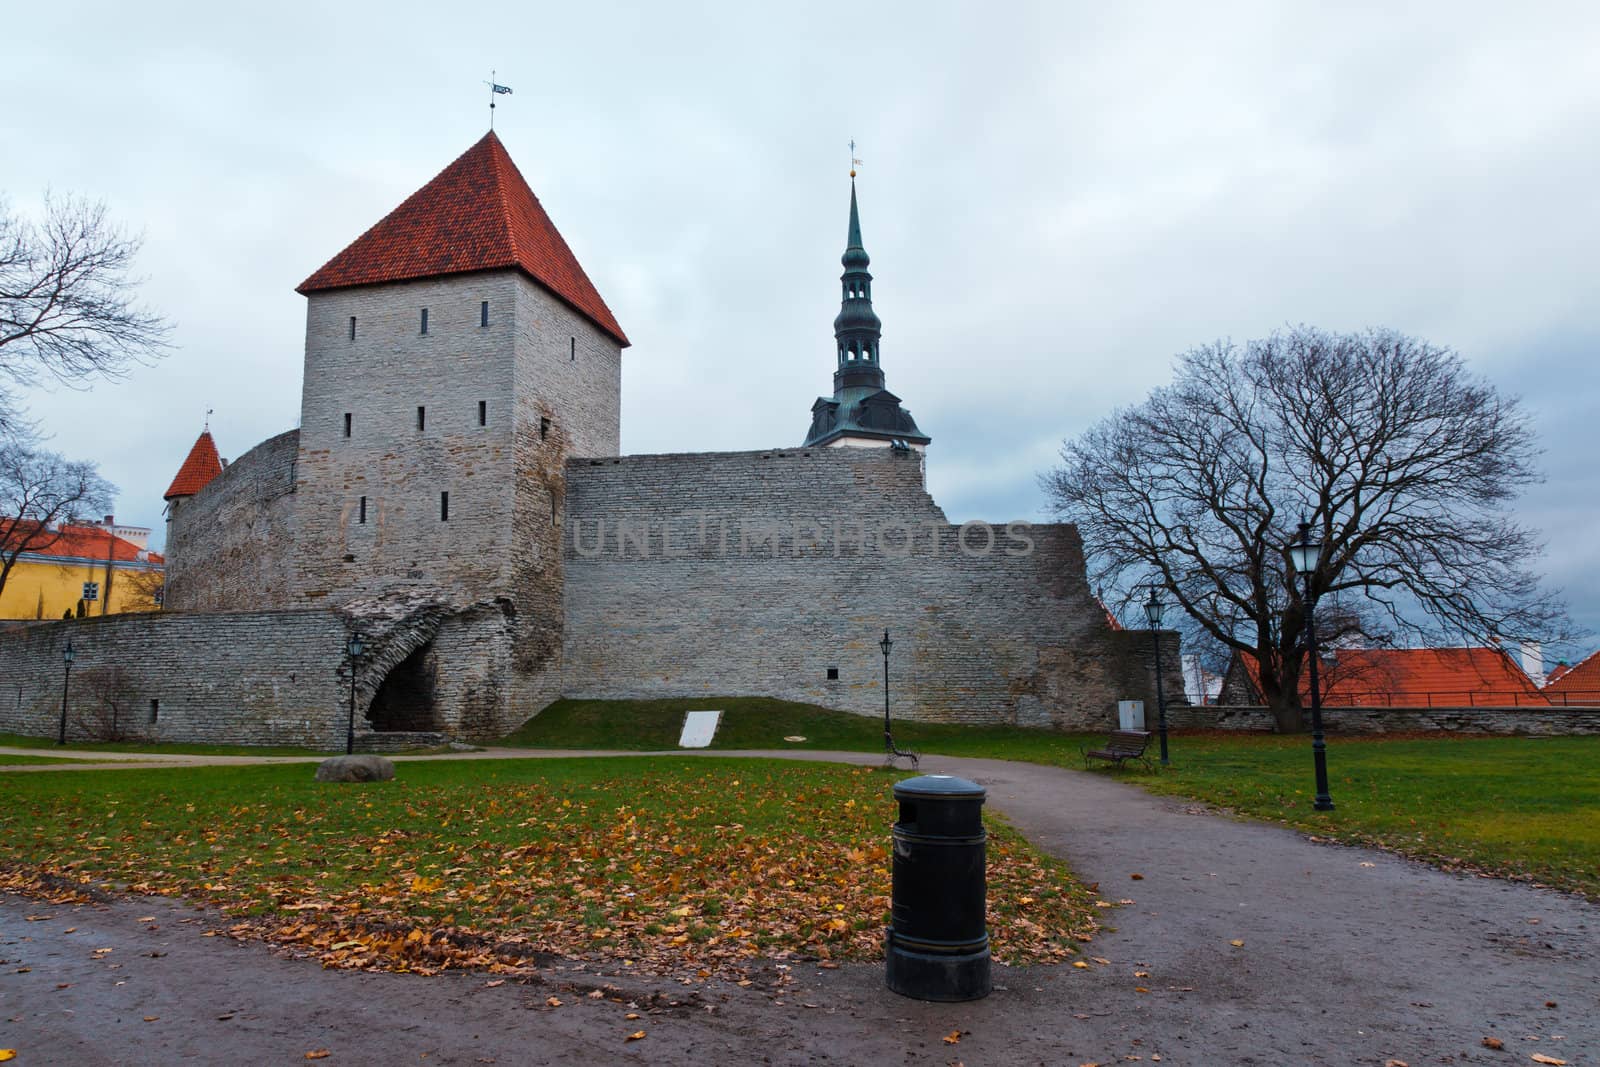 City Wall and Towers of Old Tallinn, Estonia